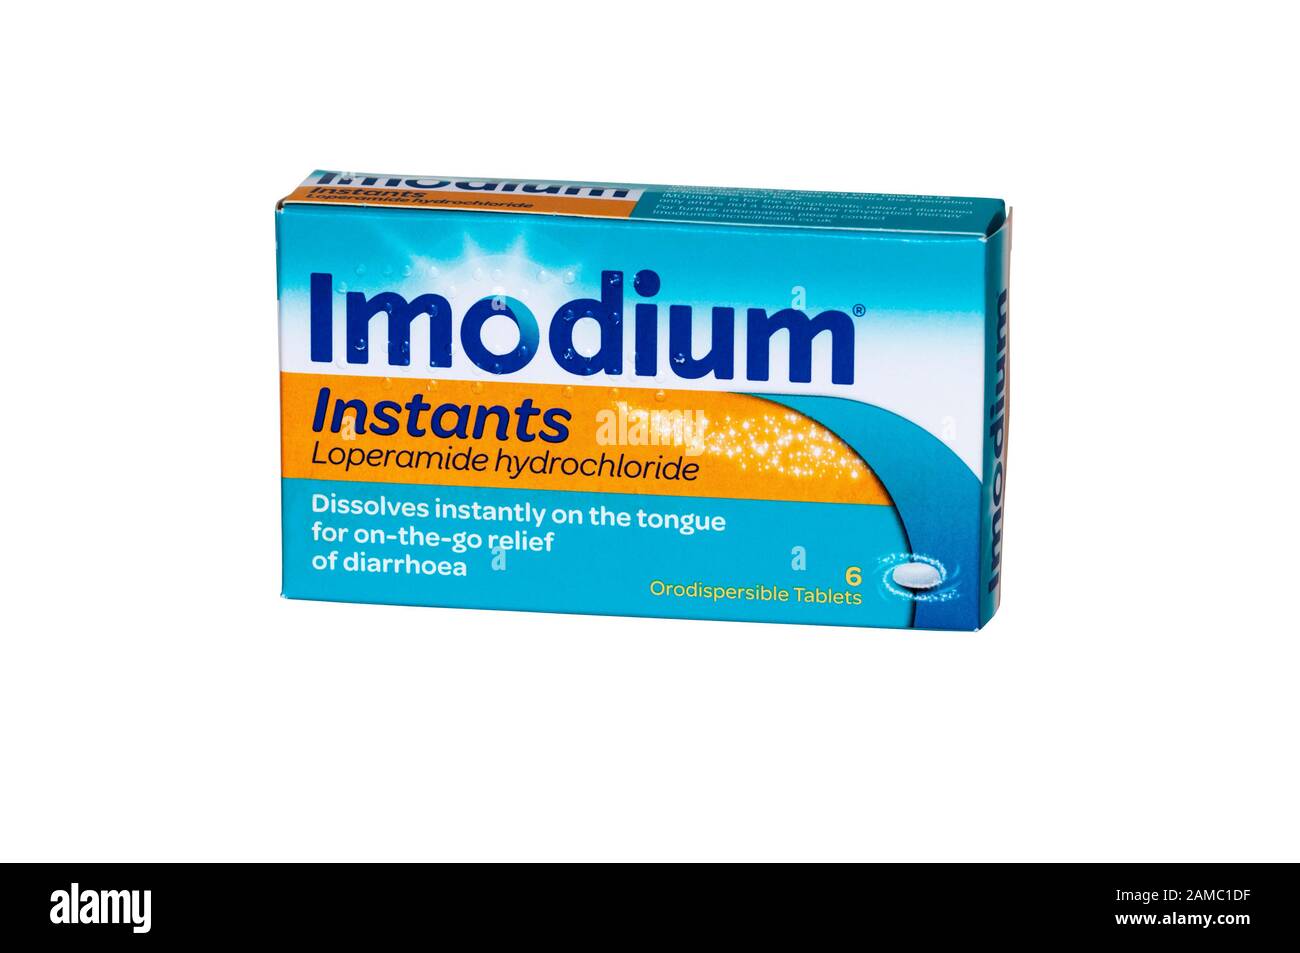 A packet of Imodium tablets for diarrhoea relief. Stock Photo